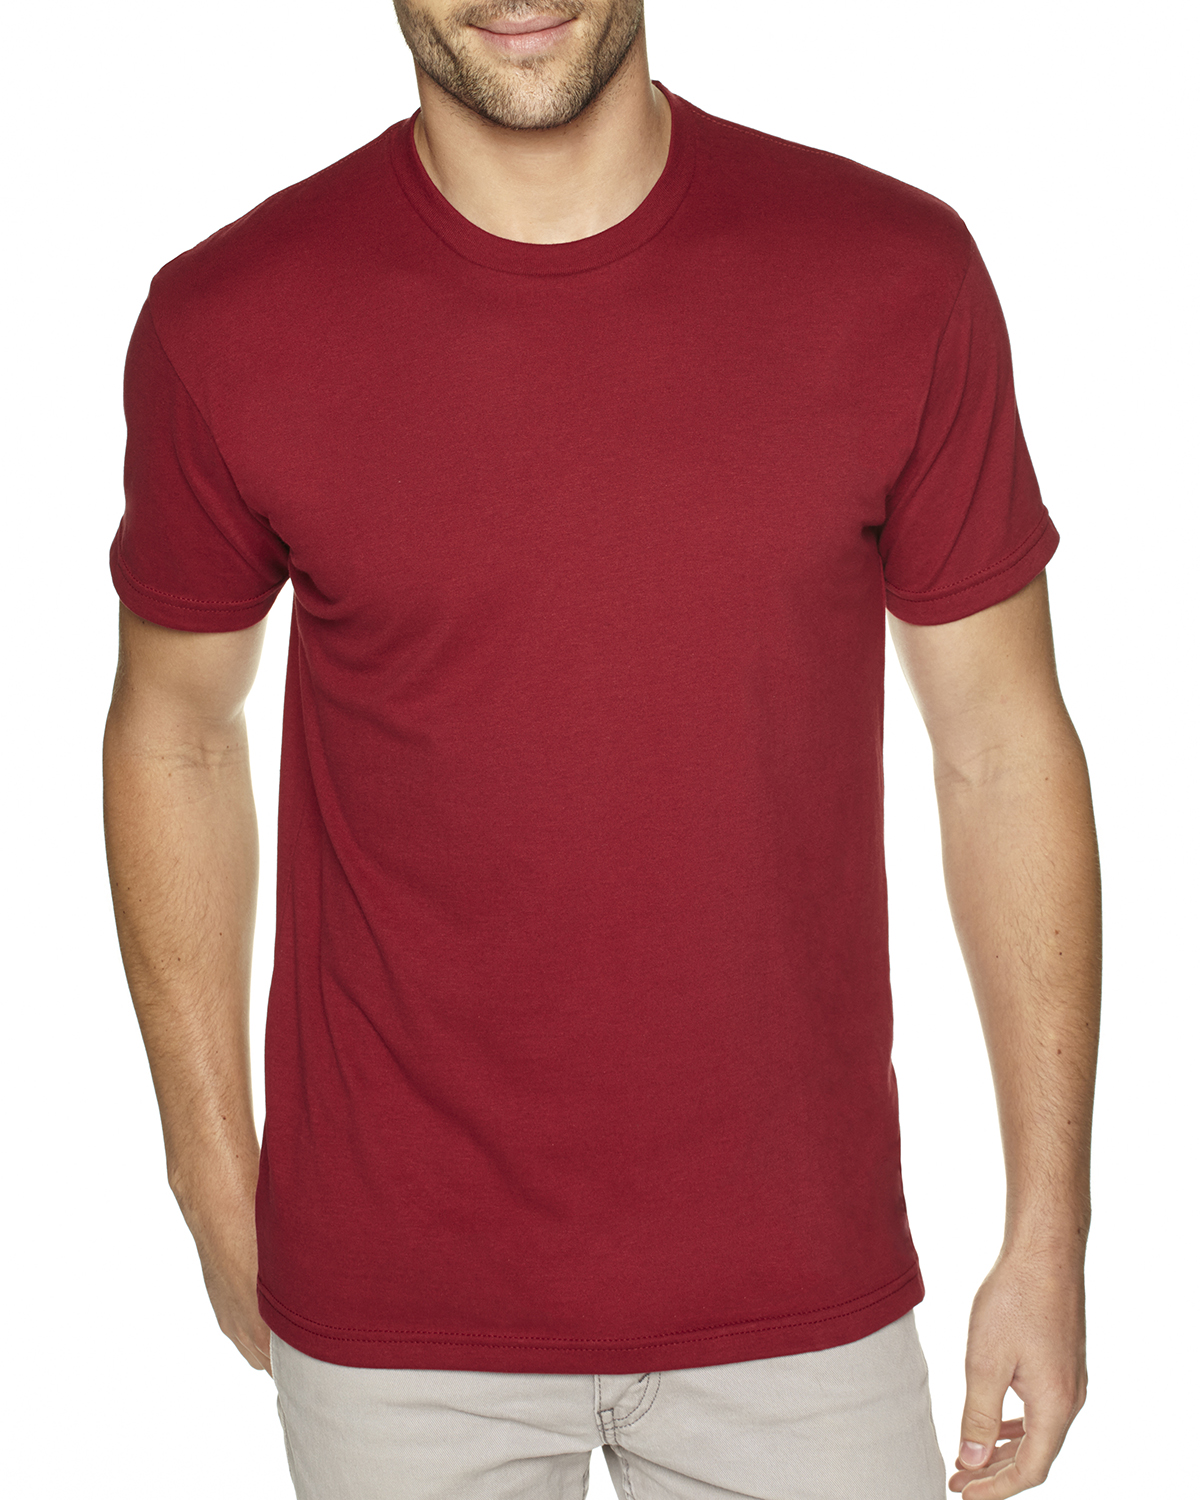 Next Level Apparel® 6410 Unisex Sueded T-Shirt - Wholesale Apparel and  Supplies